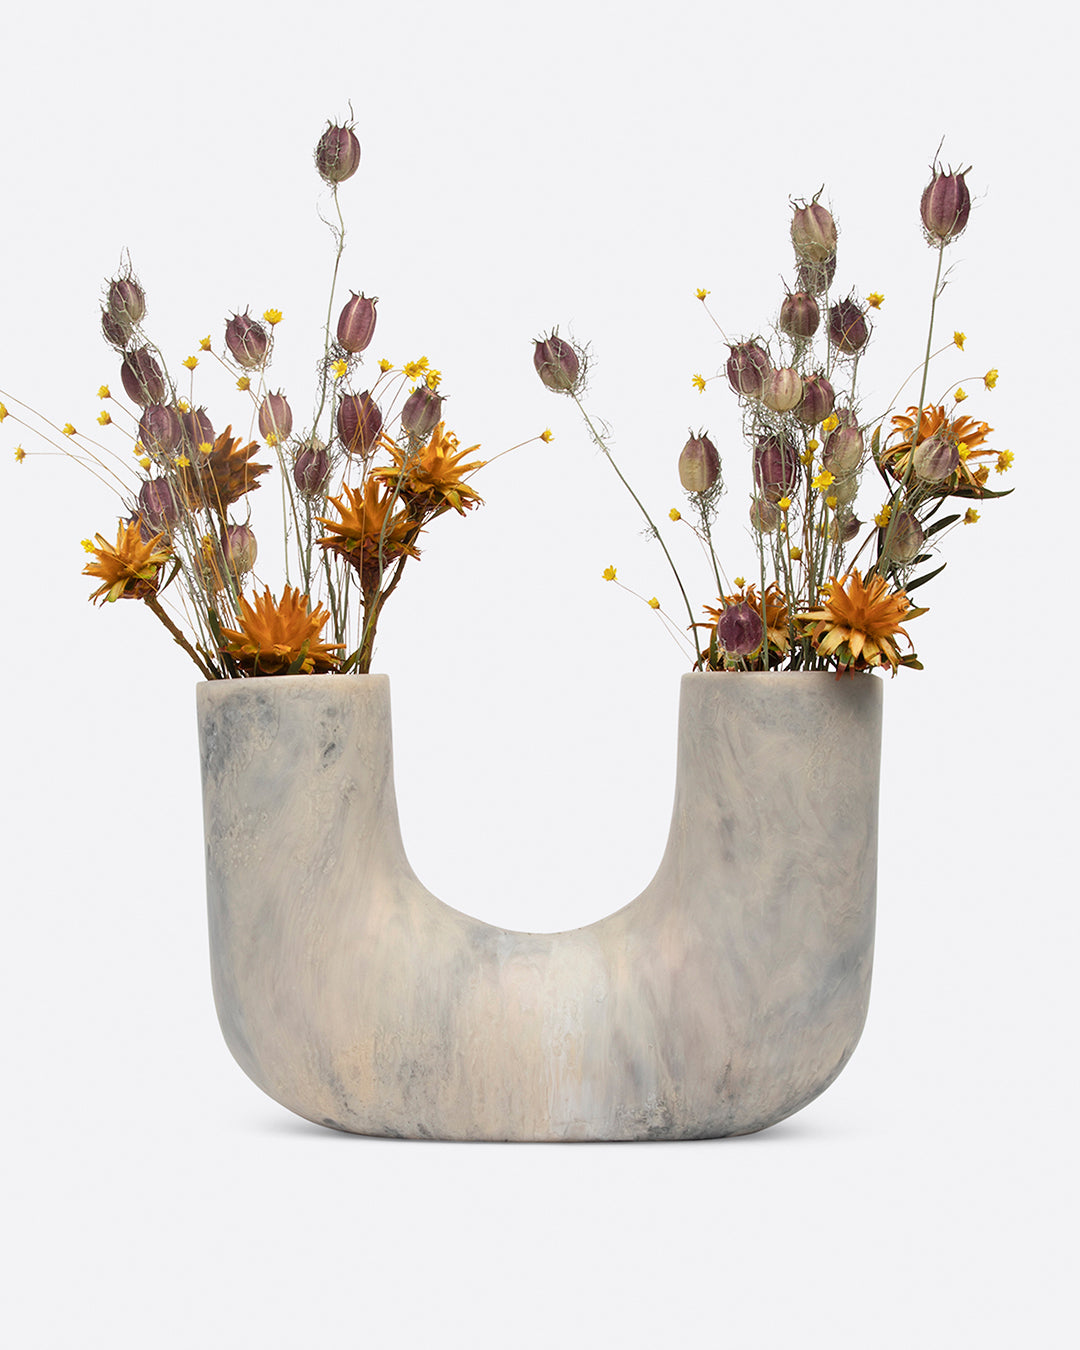 A swirled gray resin U-shaped vase with an opening on either side, shown from the front with dried flowers.